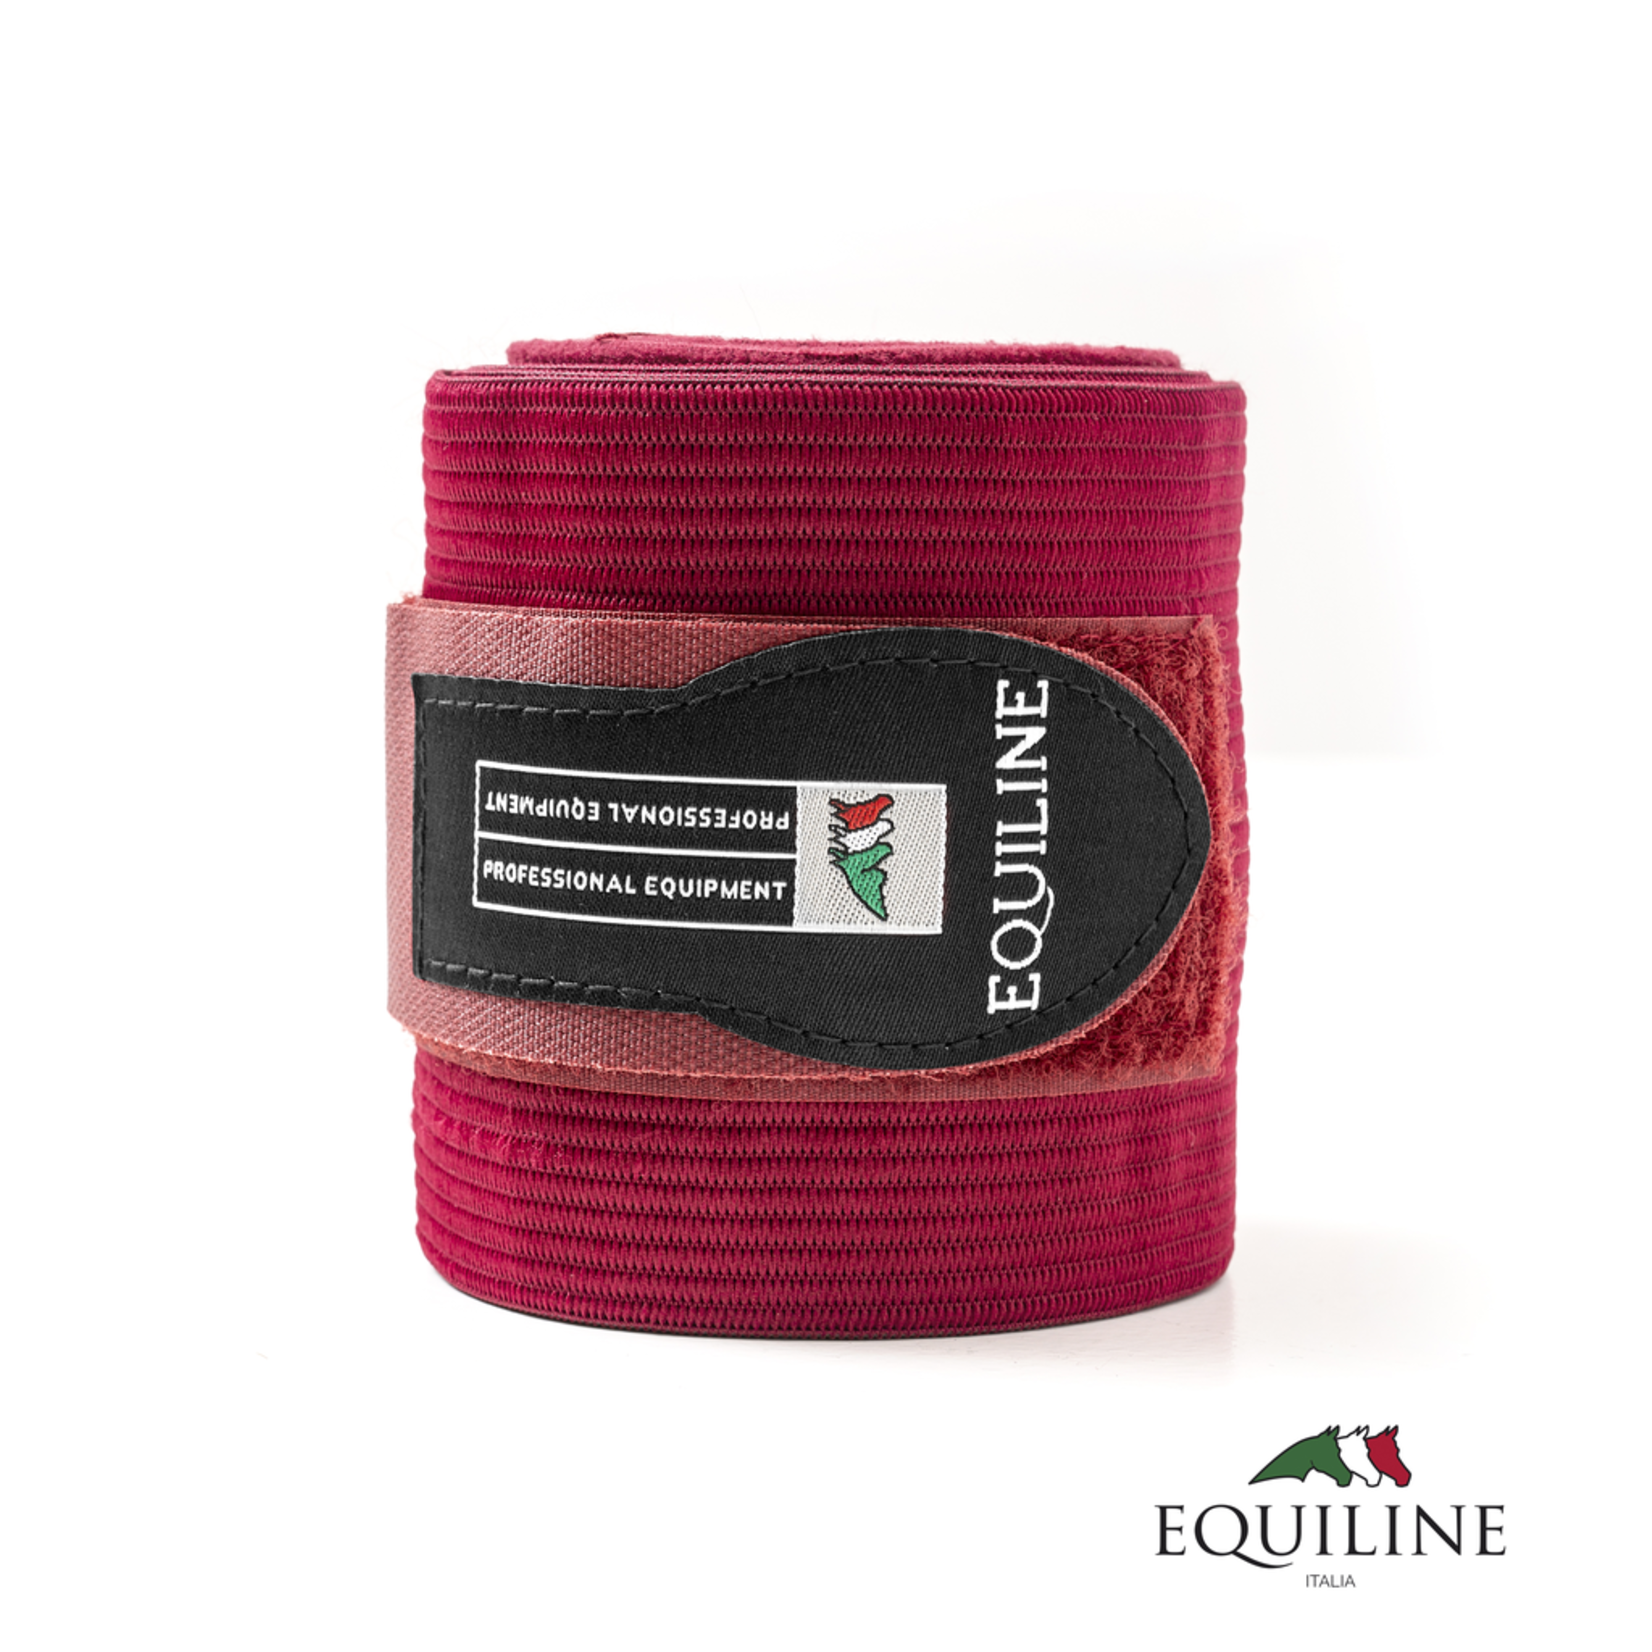 Equiline Equiline Fleece and Elastic Work Bandages